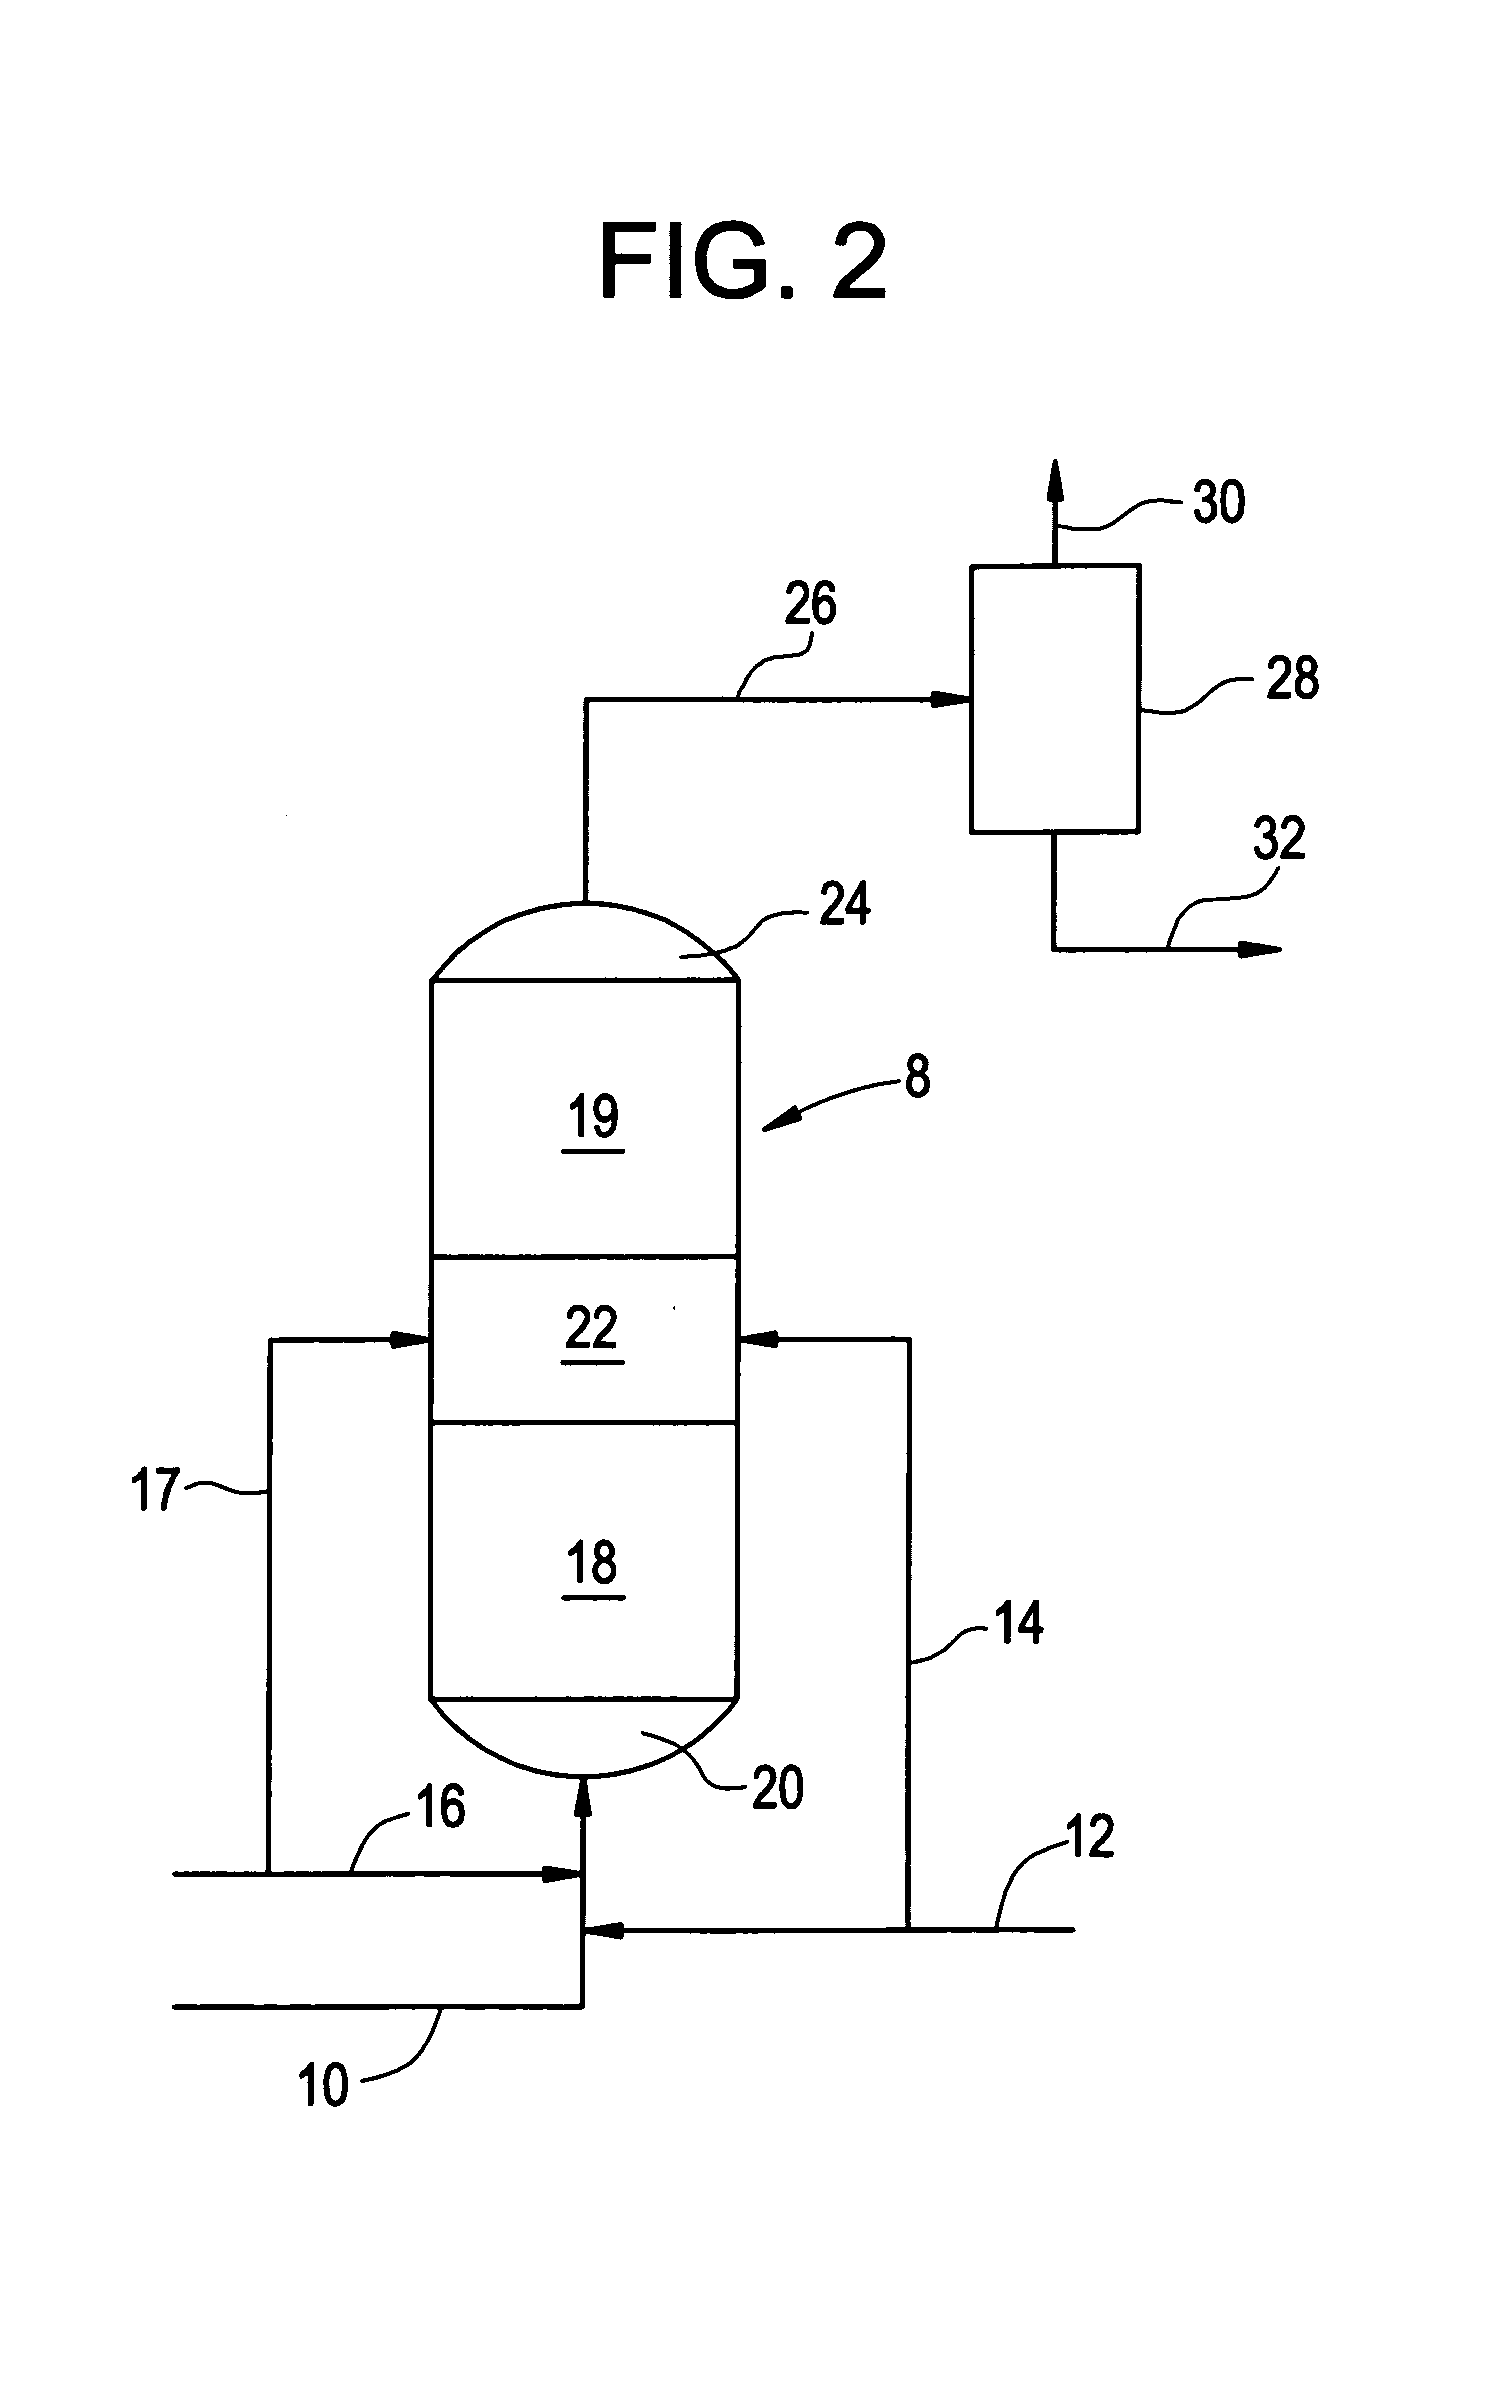 Process for the selective hydrogenation of phenylacetylene